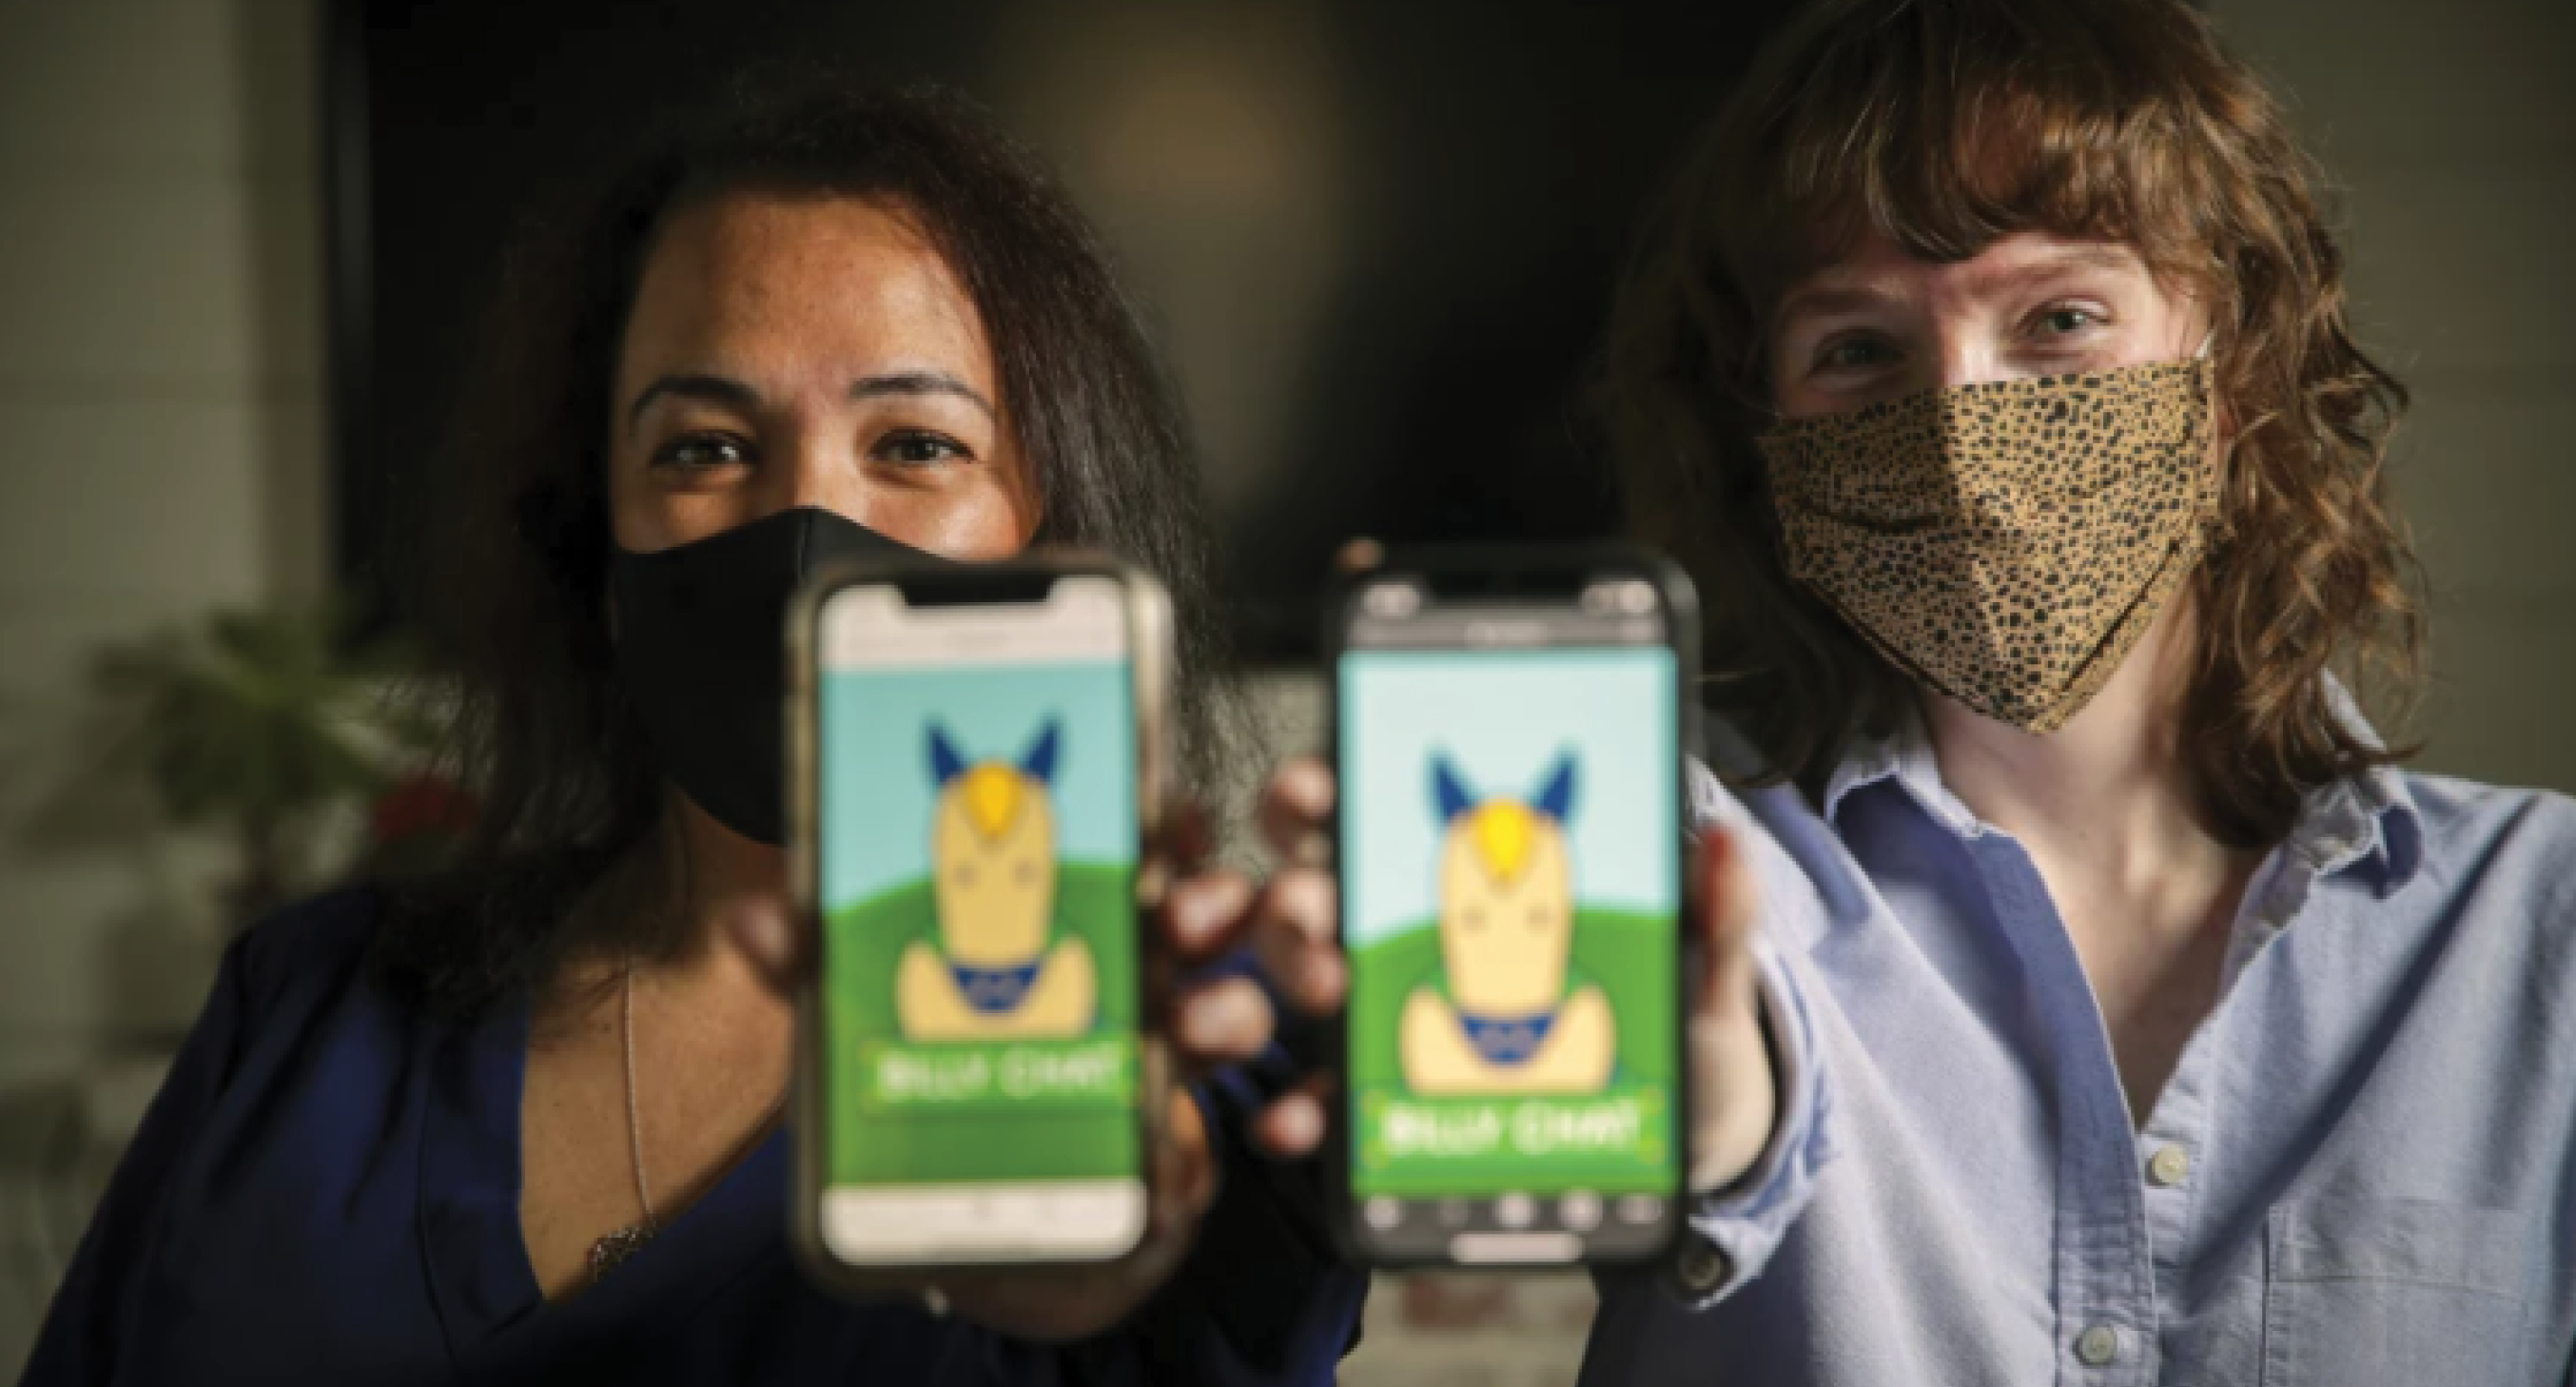 Cecilia Santiago-Gonzalez and Zoe Lance hold phones with Billy Chat logos